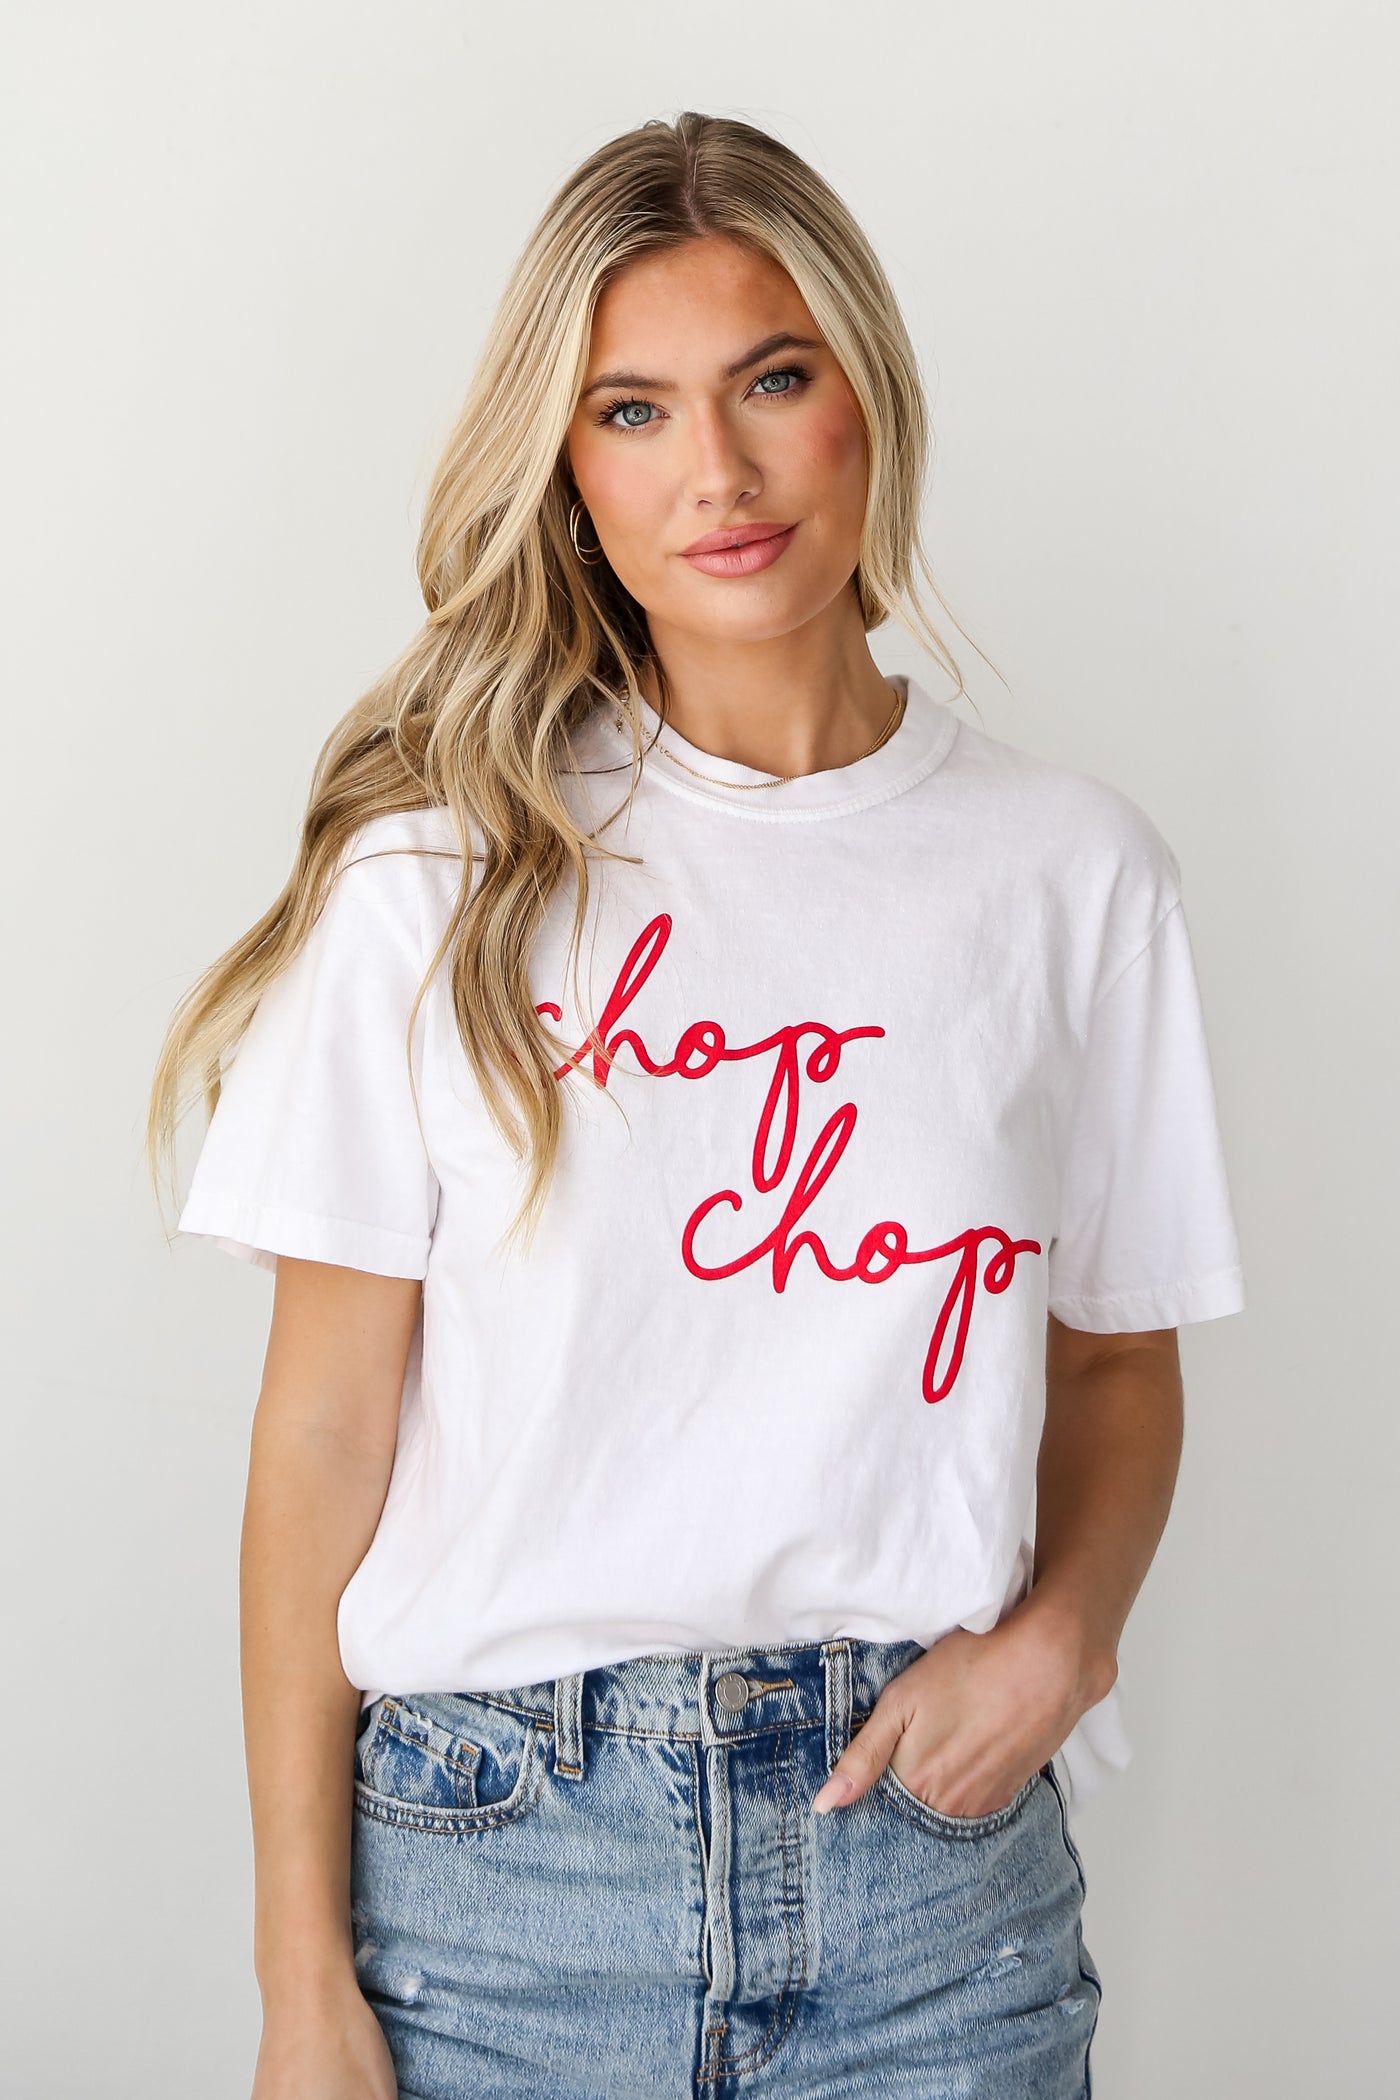 White Chop Chop Graphic Tee on model